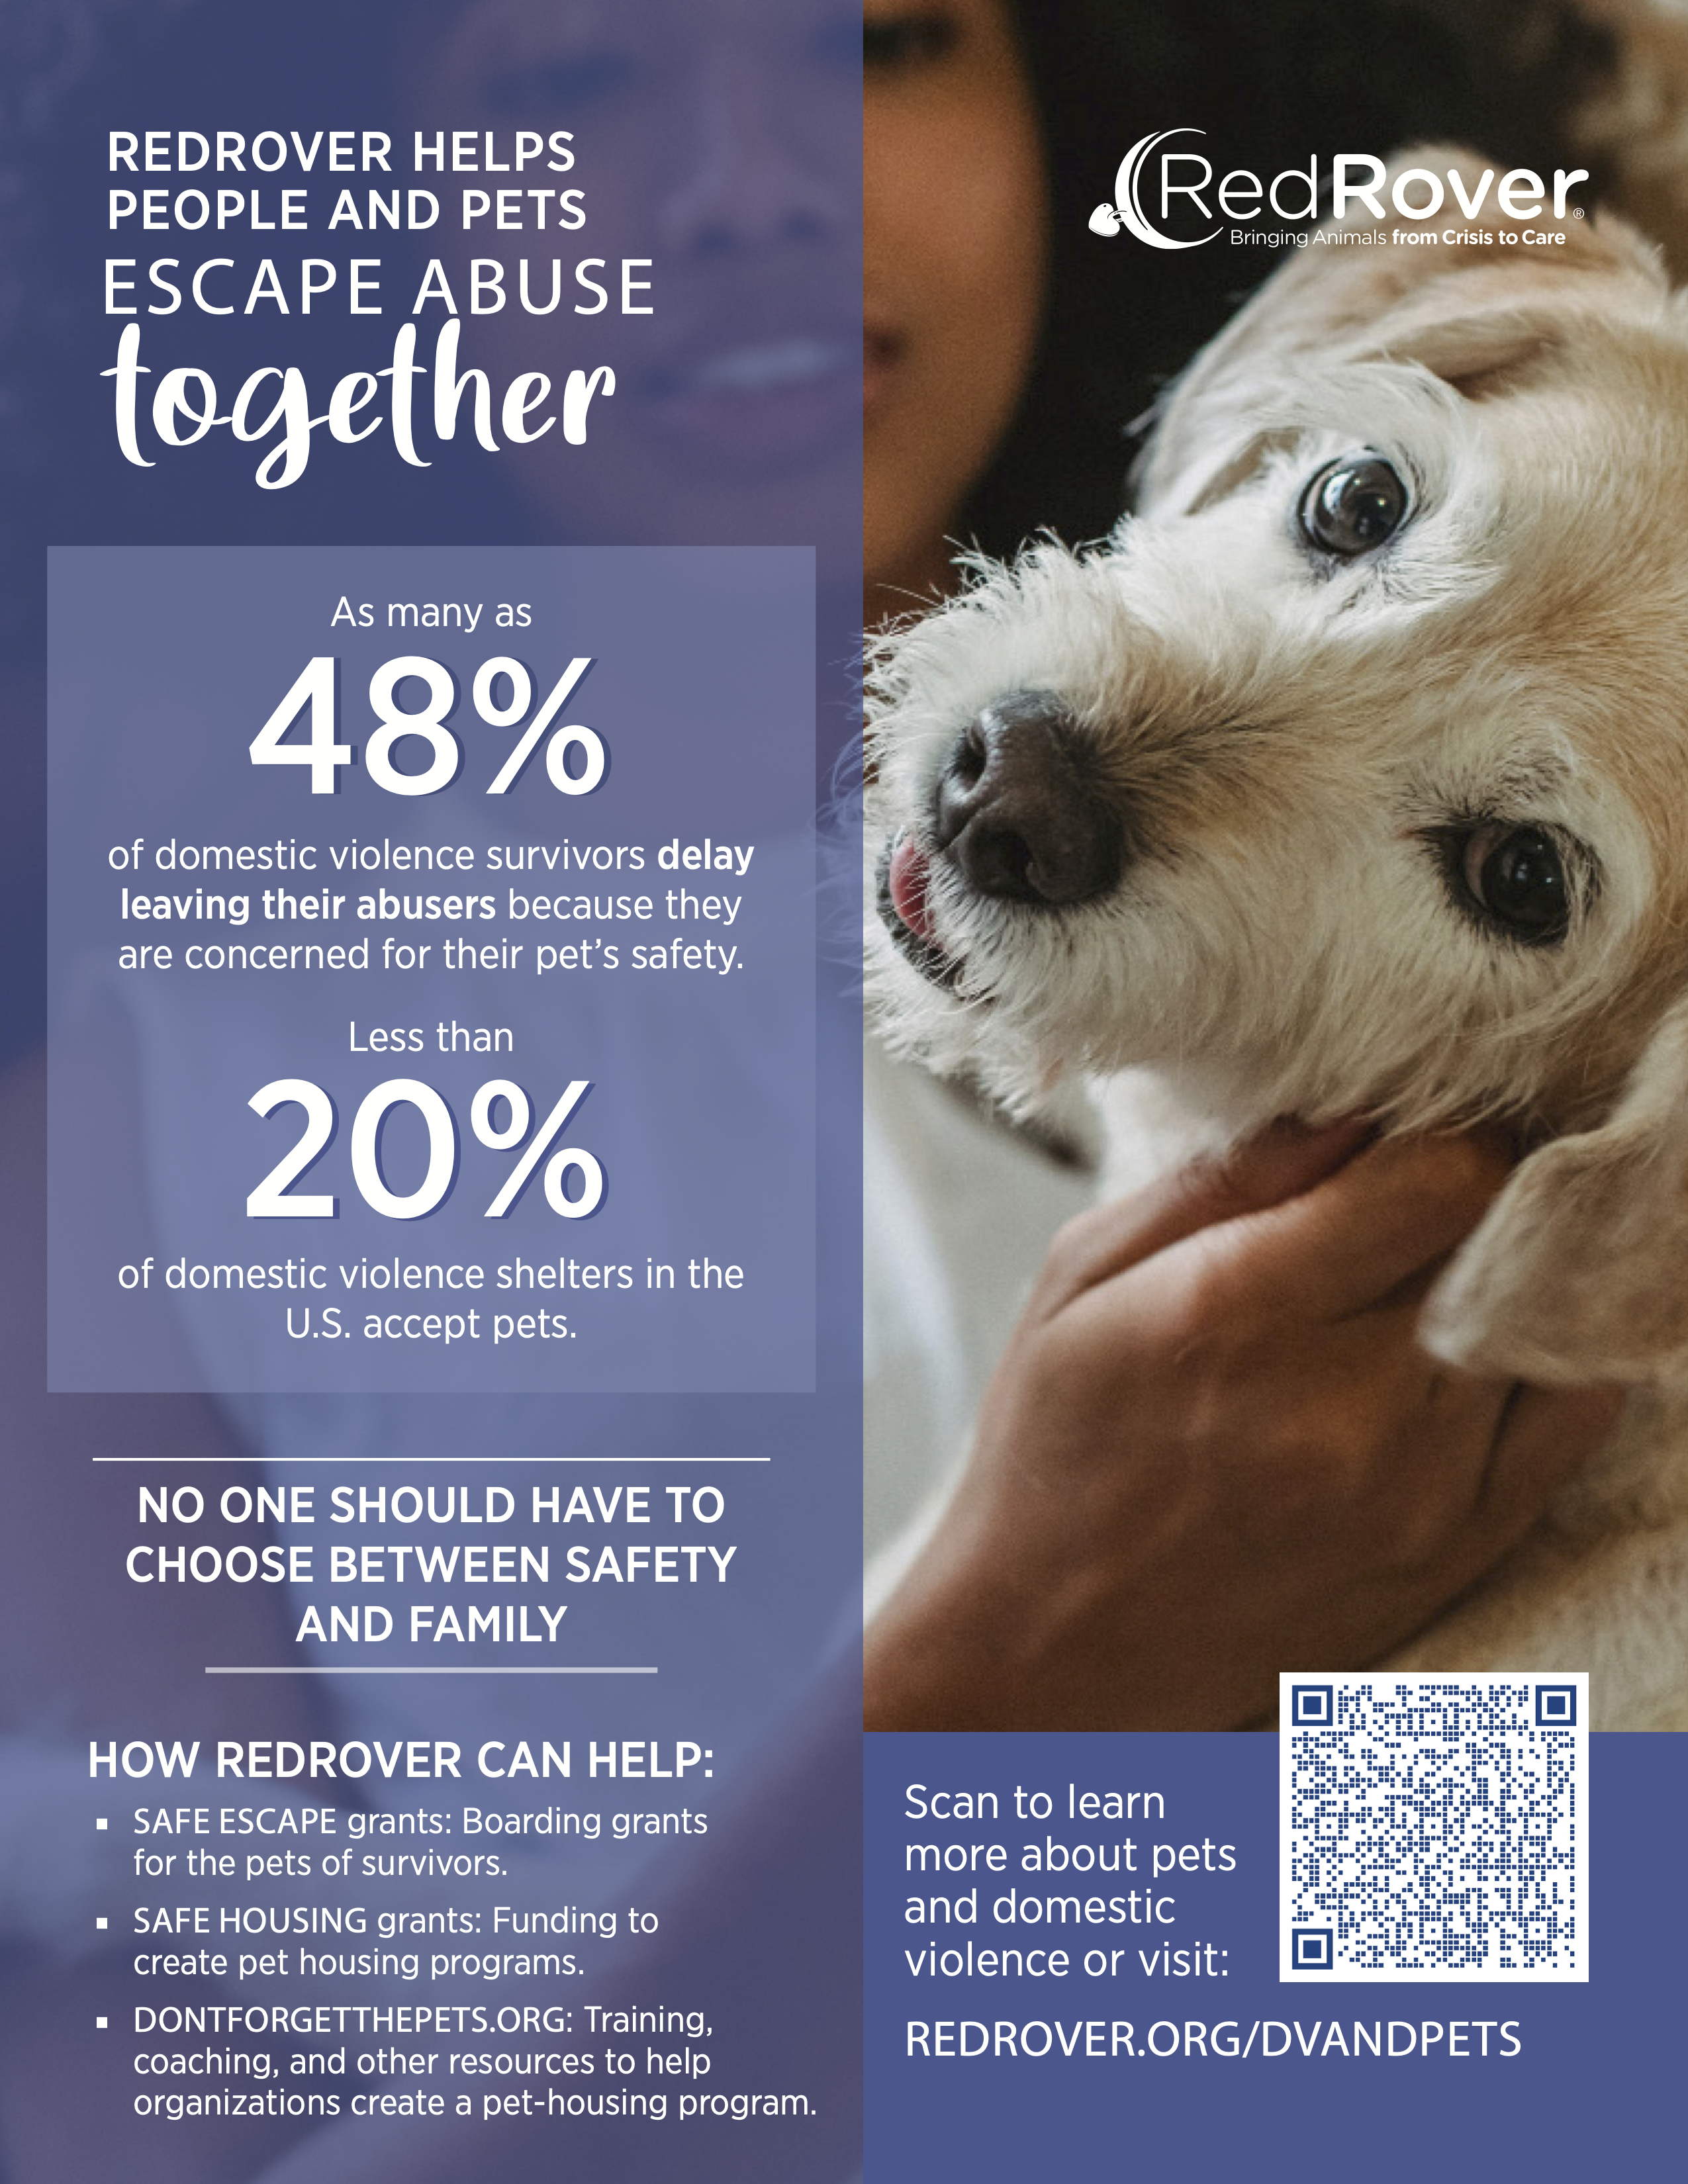 RedRover Domestic Violence and Pets Flier with statistics on the connection between domestic violence and animal abuse.